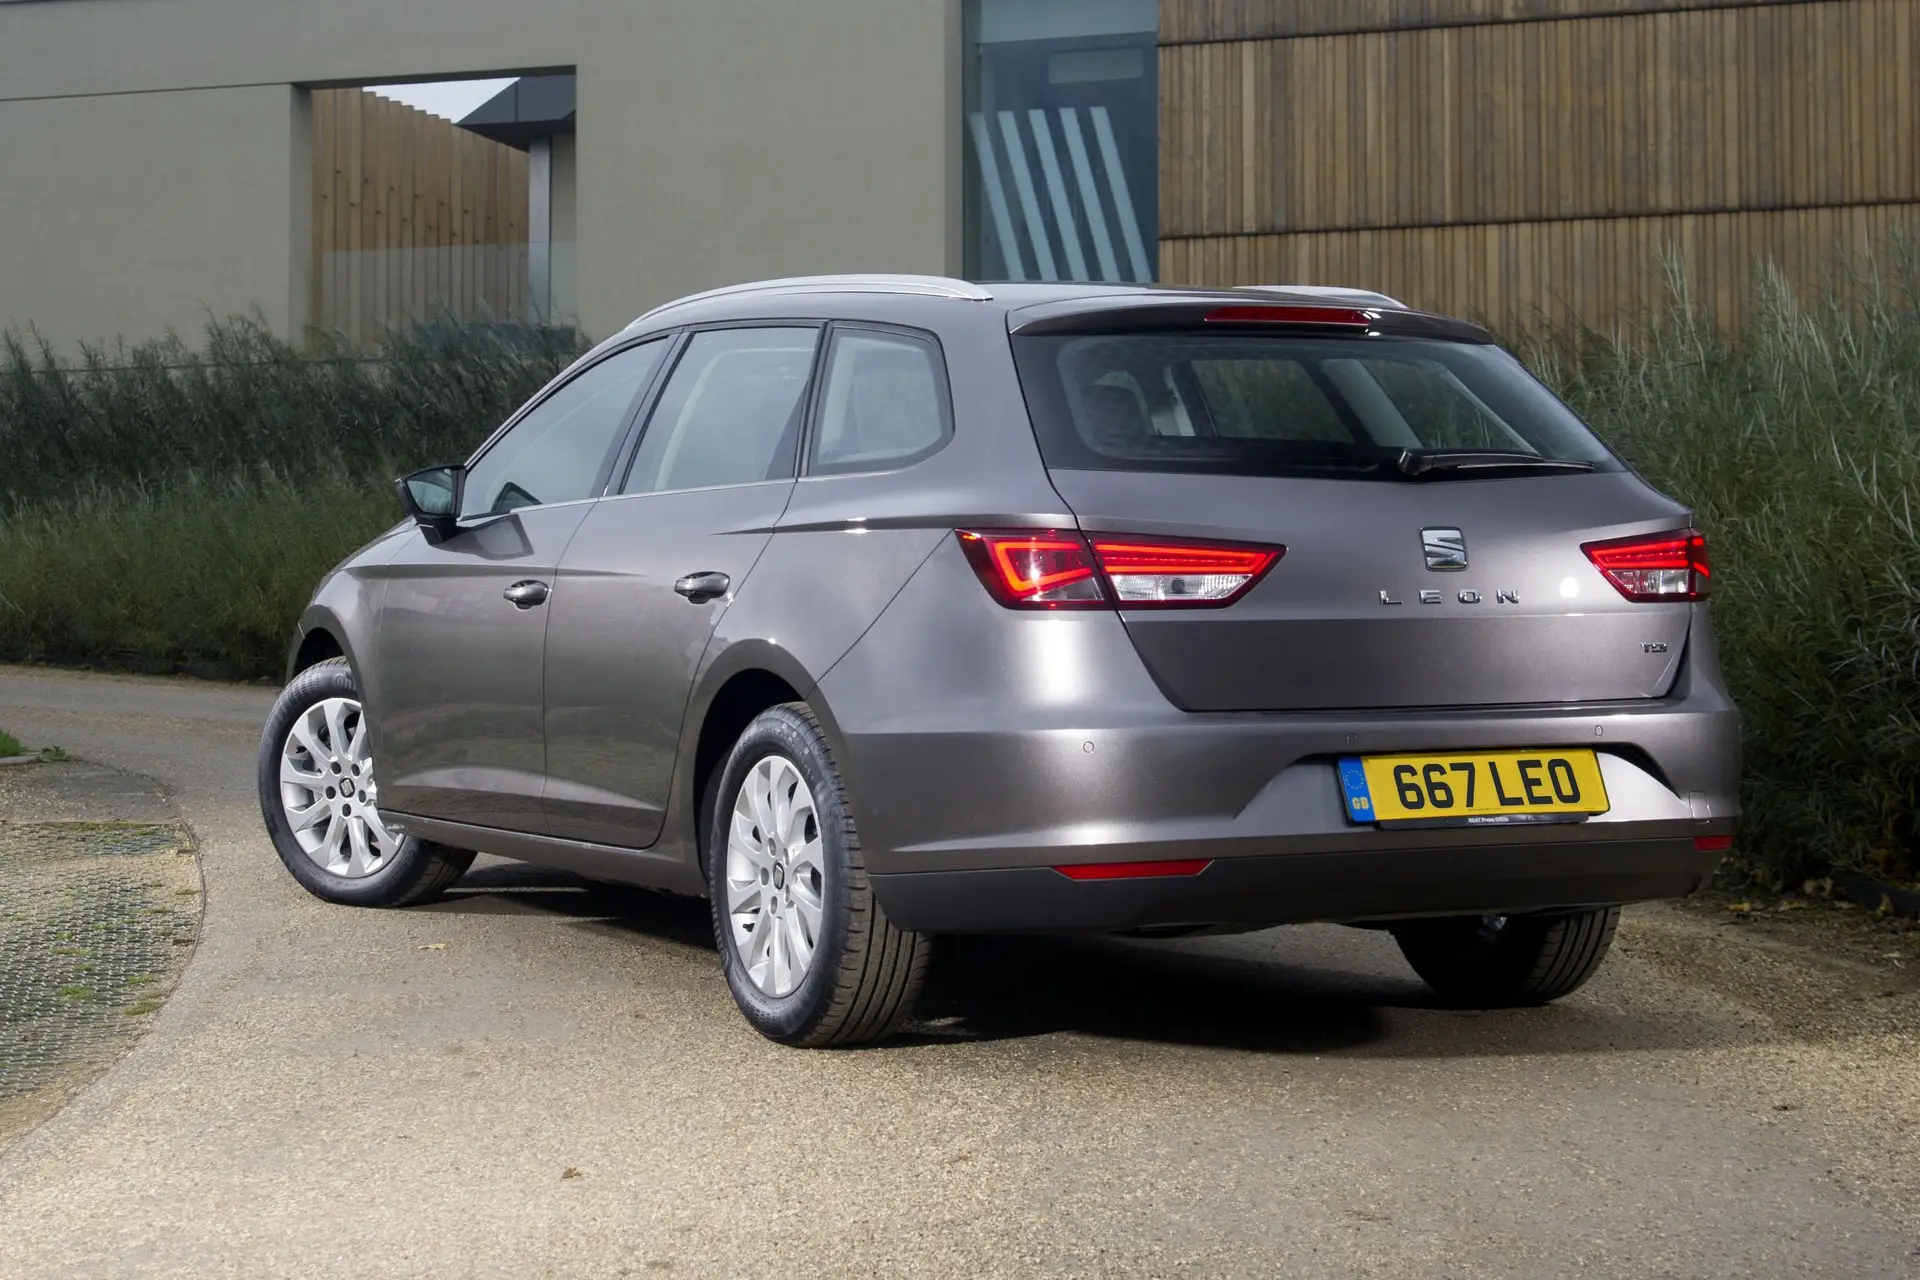 SEAT Leon ST (2014-2020) Review: exterior rear three quarter photo of the SEAT Leon ST